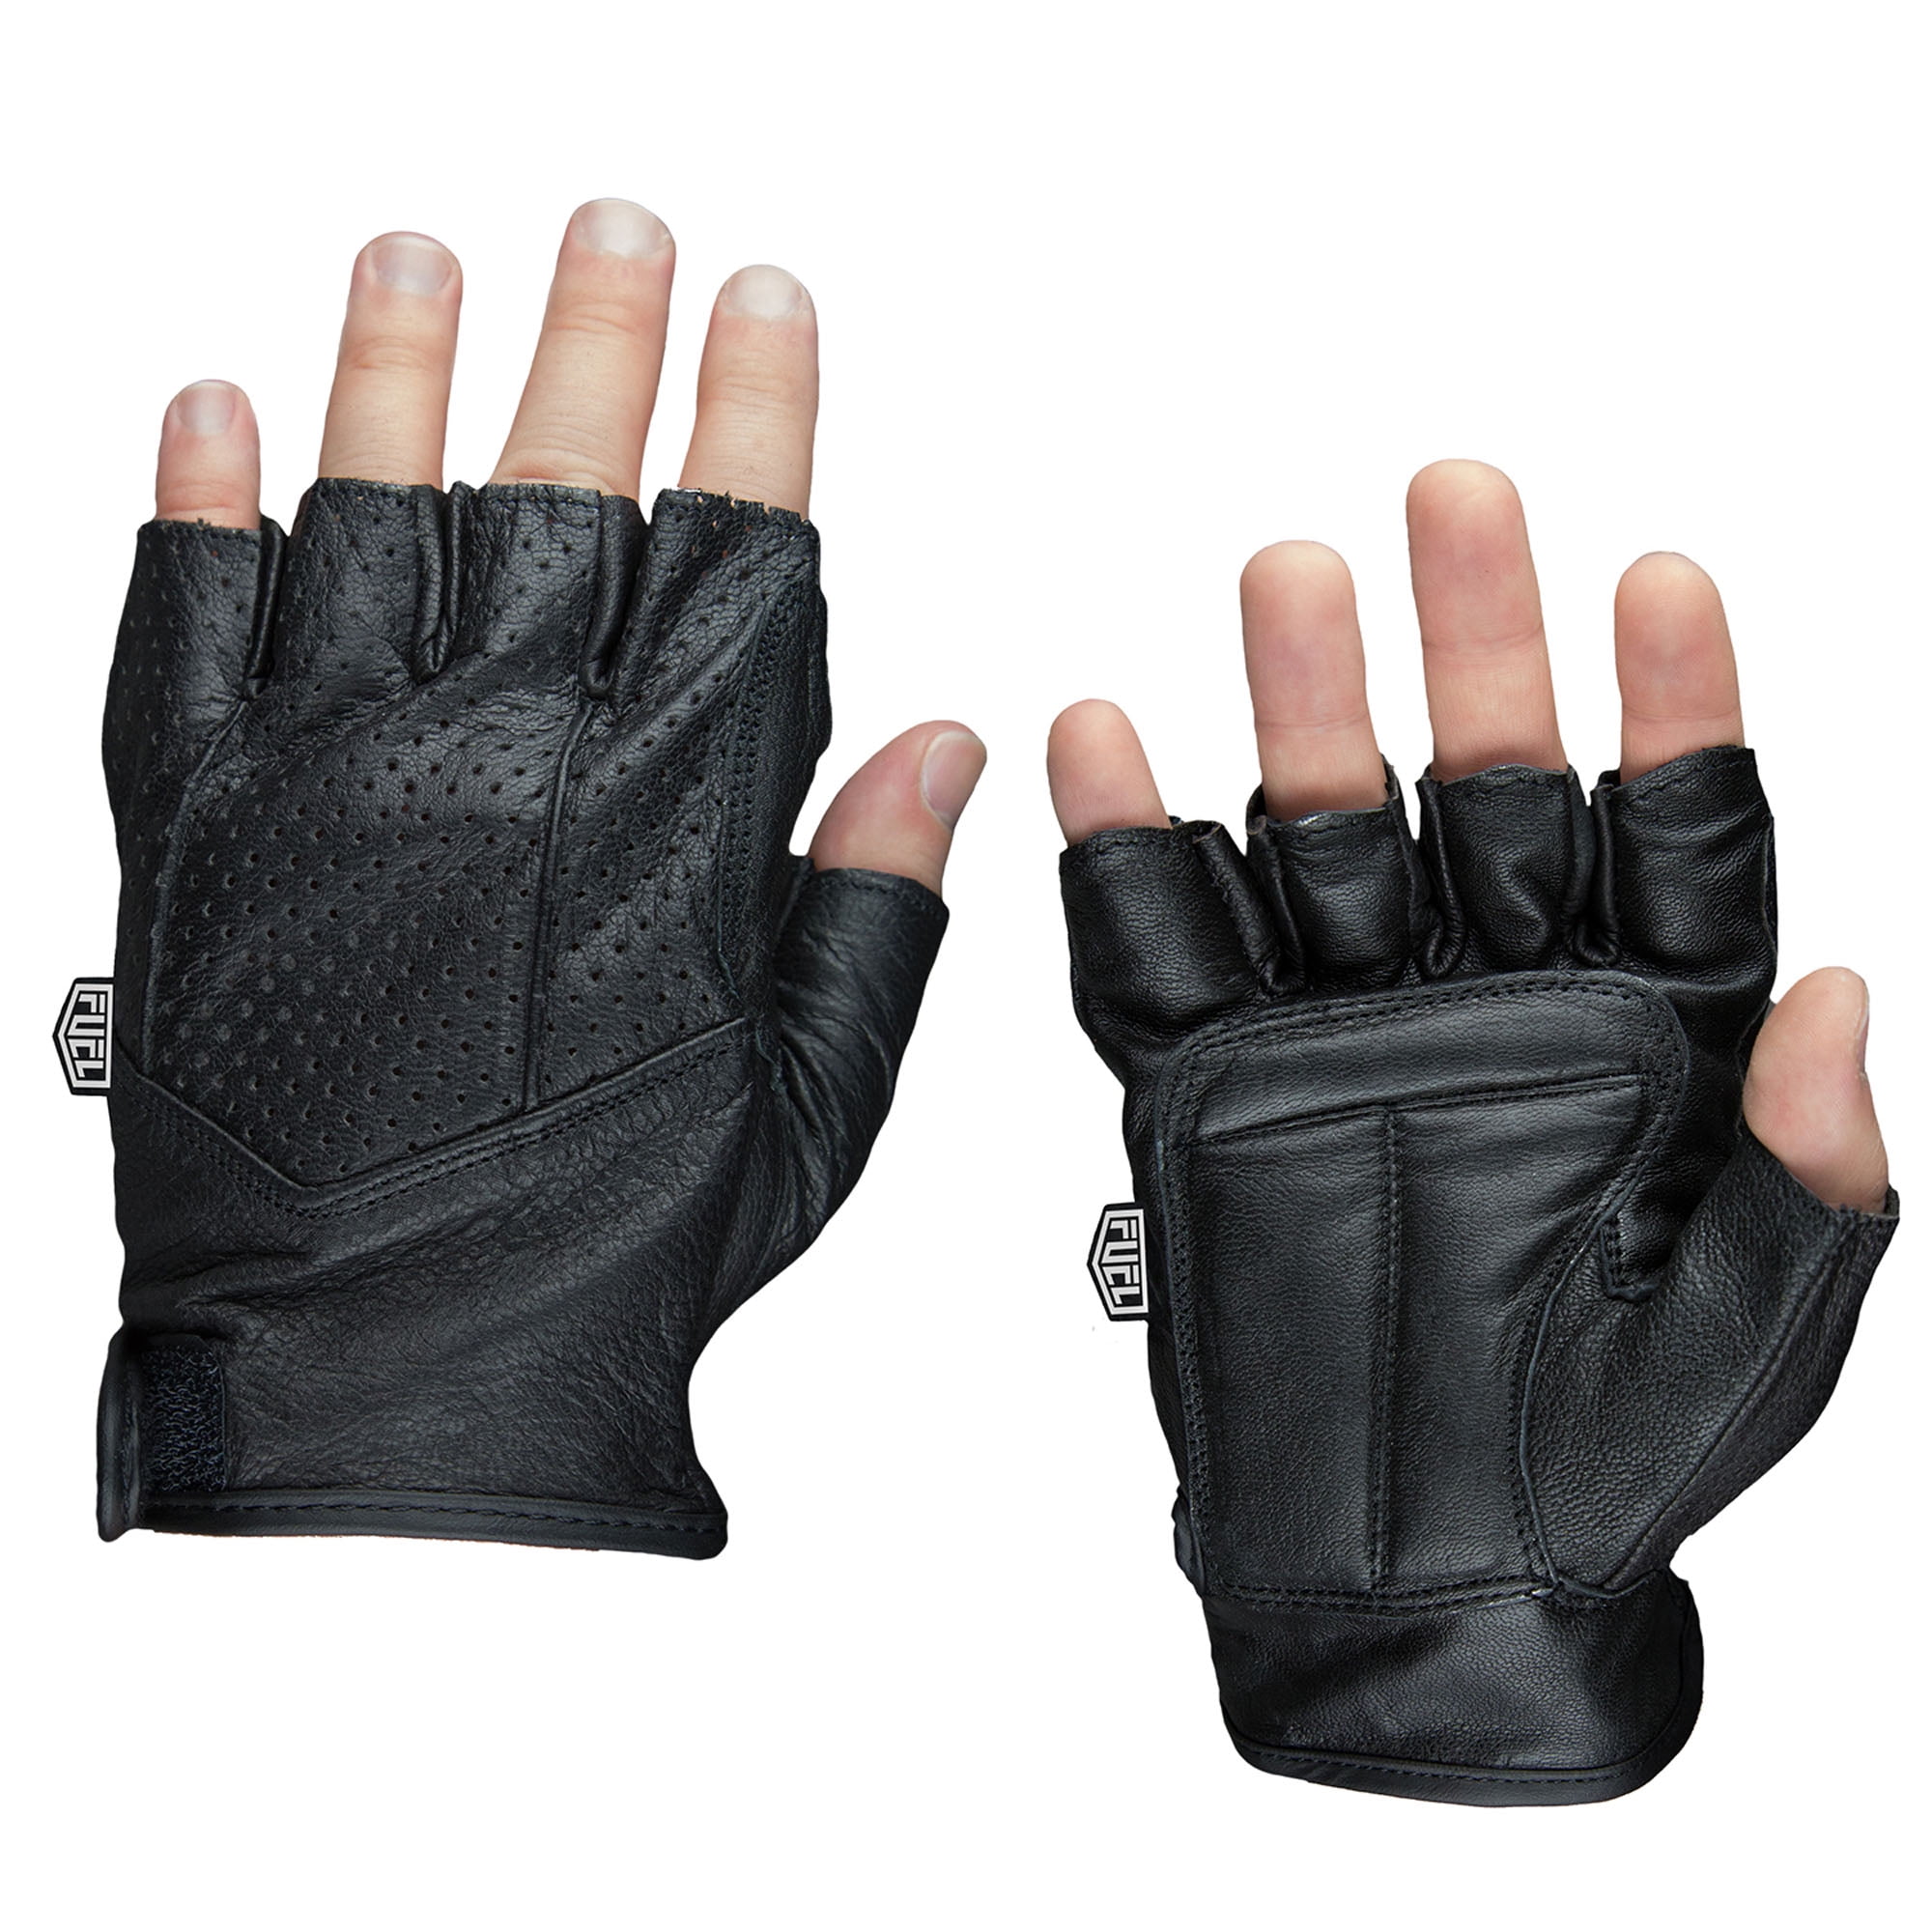 Best Fingerless Motorcycle Gloves (Review) in 2023